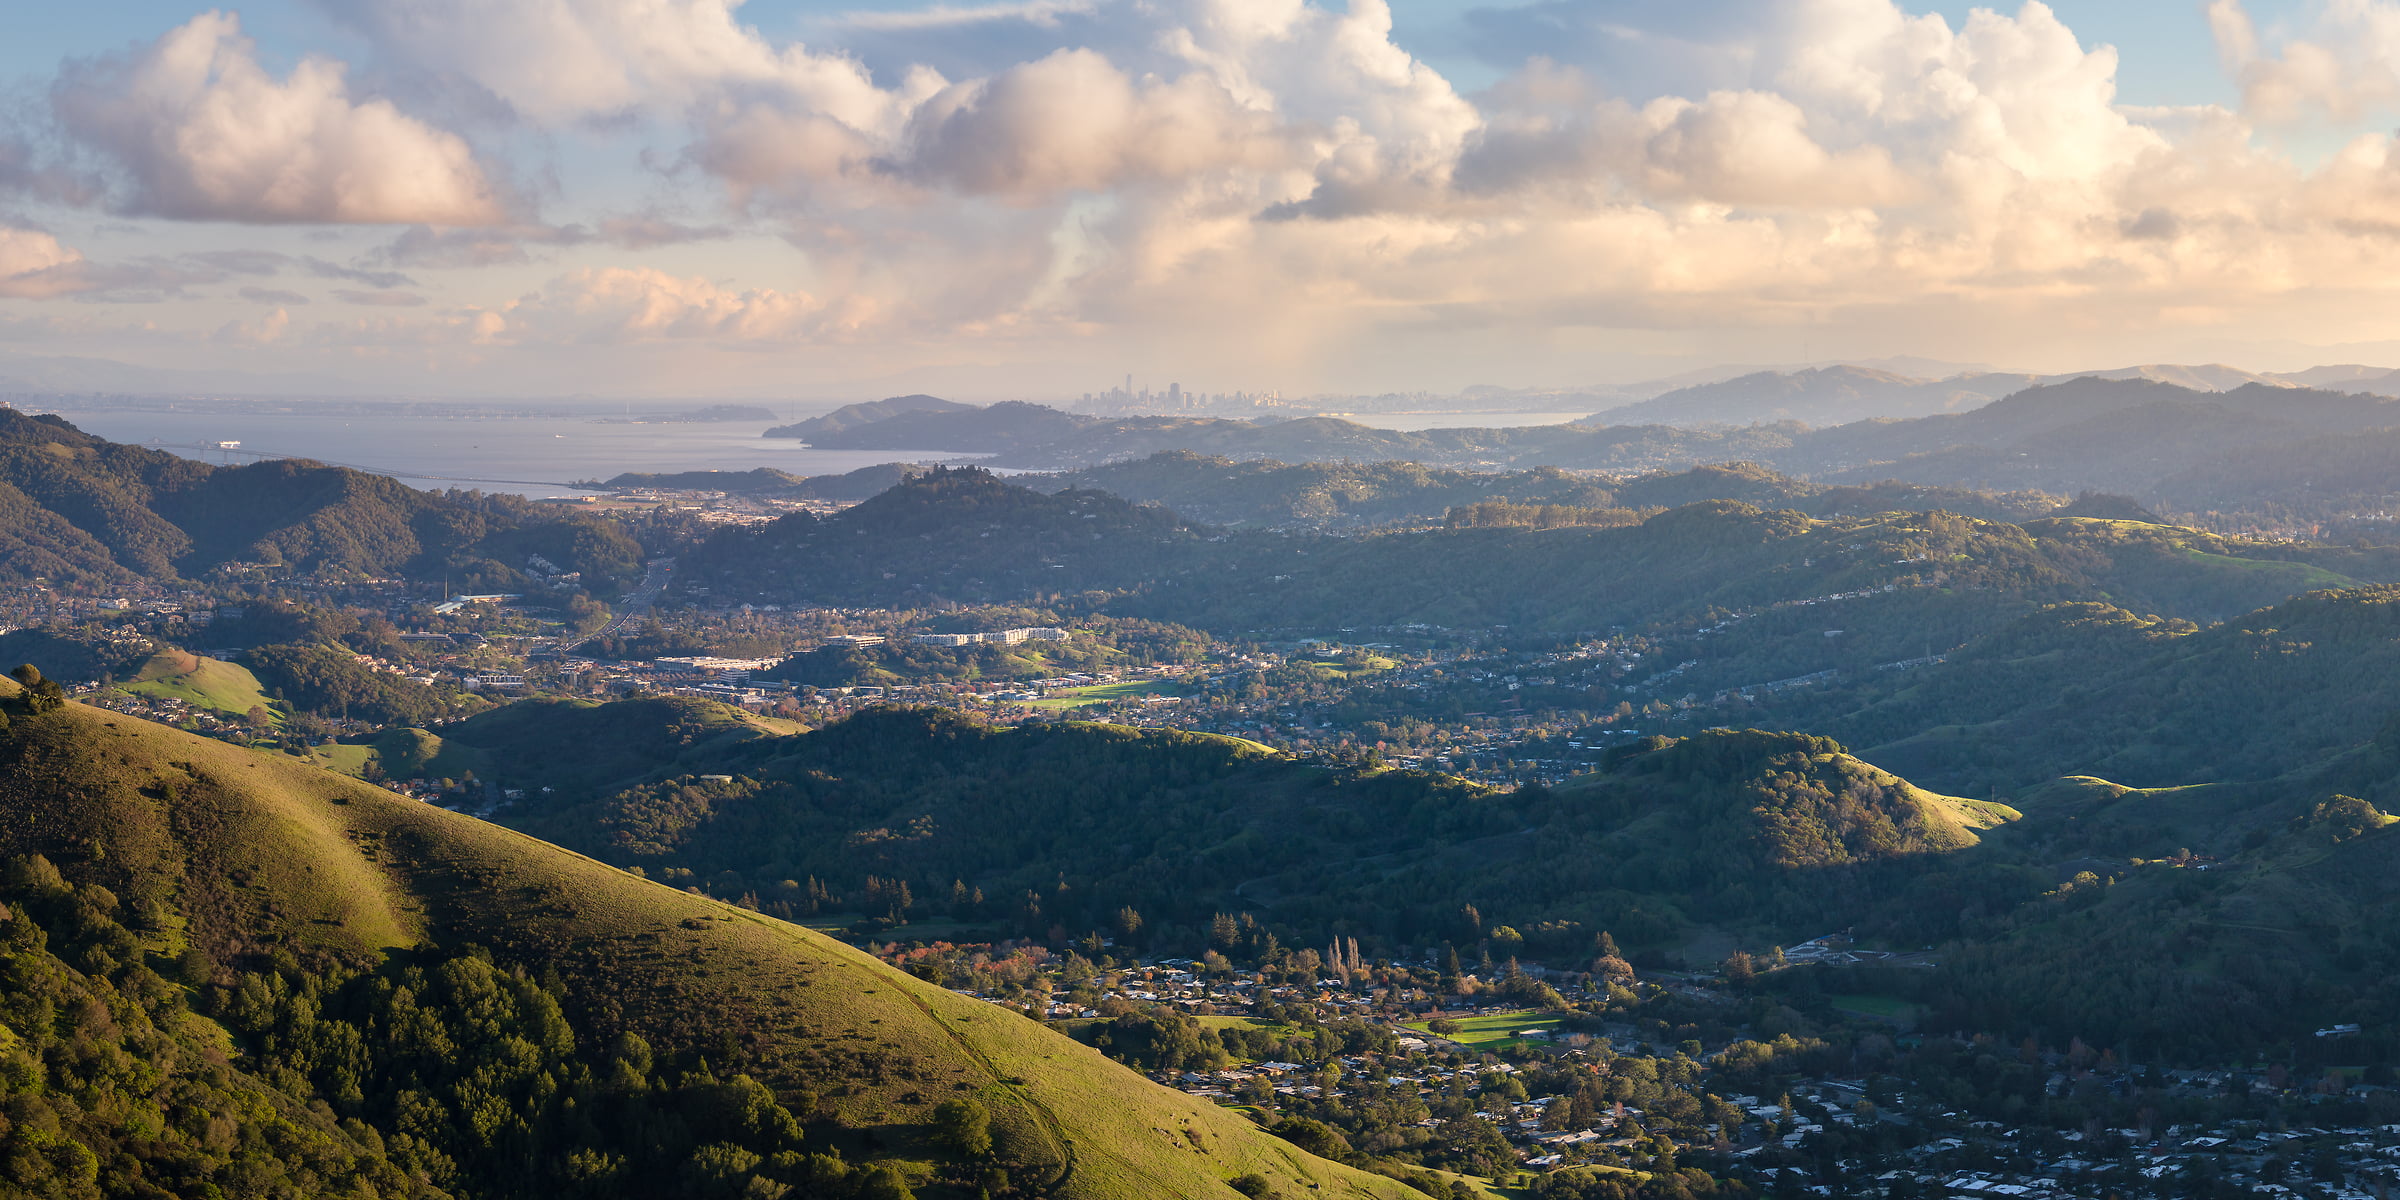 142 megapixels! A very high resolution, large-format VAST photo print of a Marin County landscape; art photograph created by Jeff Lewis in Marin County, California